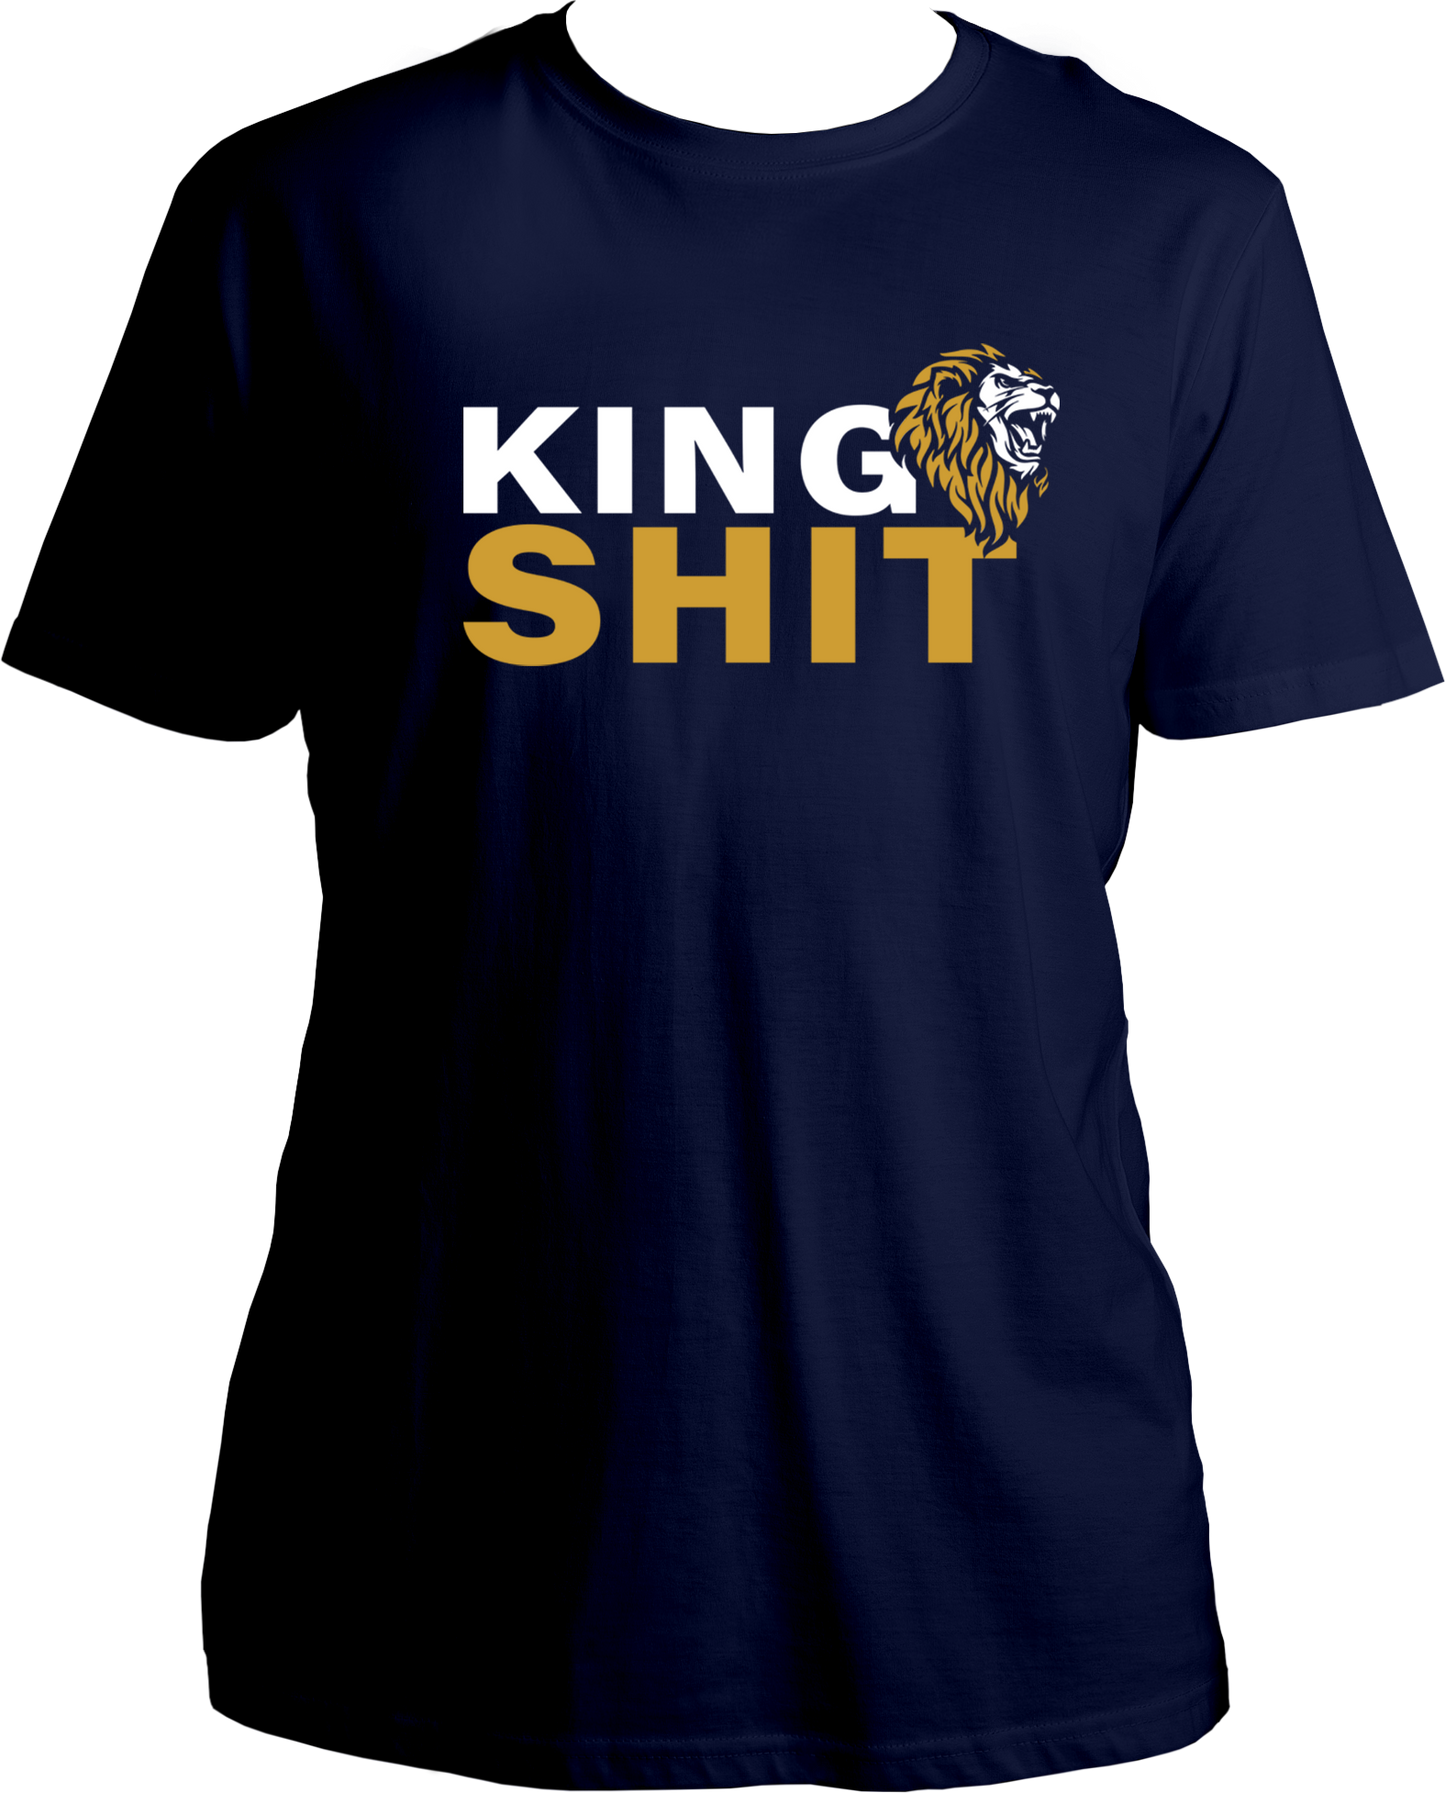 "Unleash your inner king with our King Shit unisex t-shirt! Featuring a roaring lion, this bold and stylish shirt is inspired by the latest Punjabi track. Made with pure cotton, it's perfect for showing off your swag. Don't miss out, invite all the Punjabi boys to shop this amazing t-shirt now!"